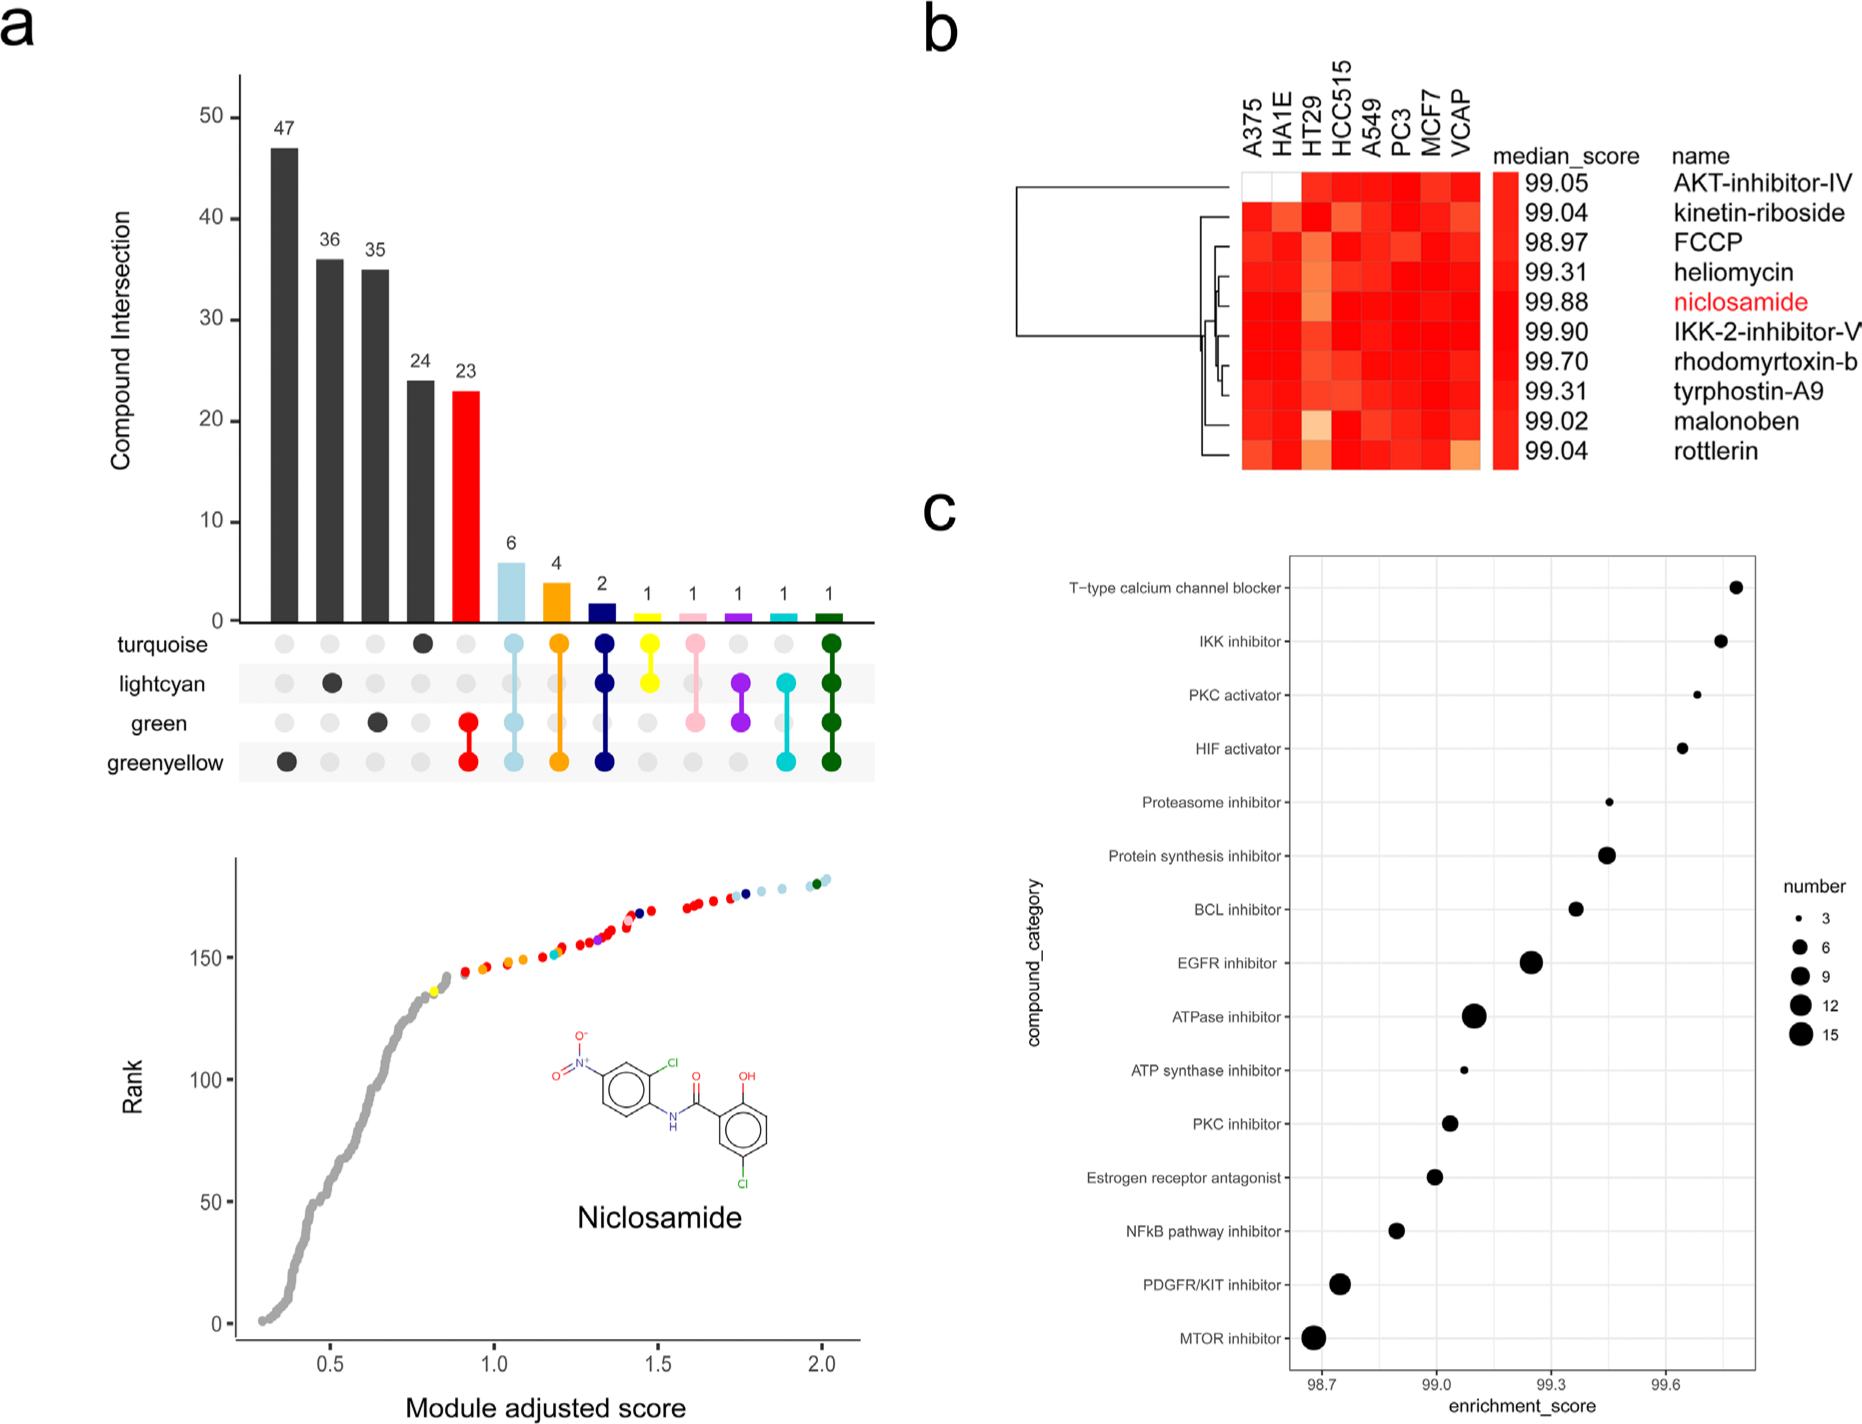 Fig. 8 
            Compound screening based on rheumatoid arthritis (RA)-related modules. a) Intersection of compounds targeting to specific RA-related modules and enrichment scores adjusted by module-trait correlation coefficient. b) Heatmap of gene expression signature of niclosamide and the compounds with similar signature. c) Compound categories with similar gene expression signature to niclosamide. EGFR, epidermal growth factor receptor; mTOR, mammalian target of rapamycin; NFκB, nuclear factor kappa-light-chain-enhancer of activated B cells; PDGFR, platelet-derived growth factor receptor; PKC, protein kinase C.
          